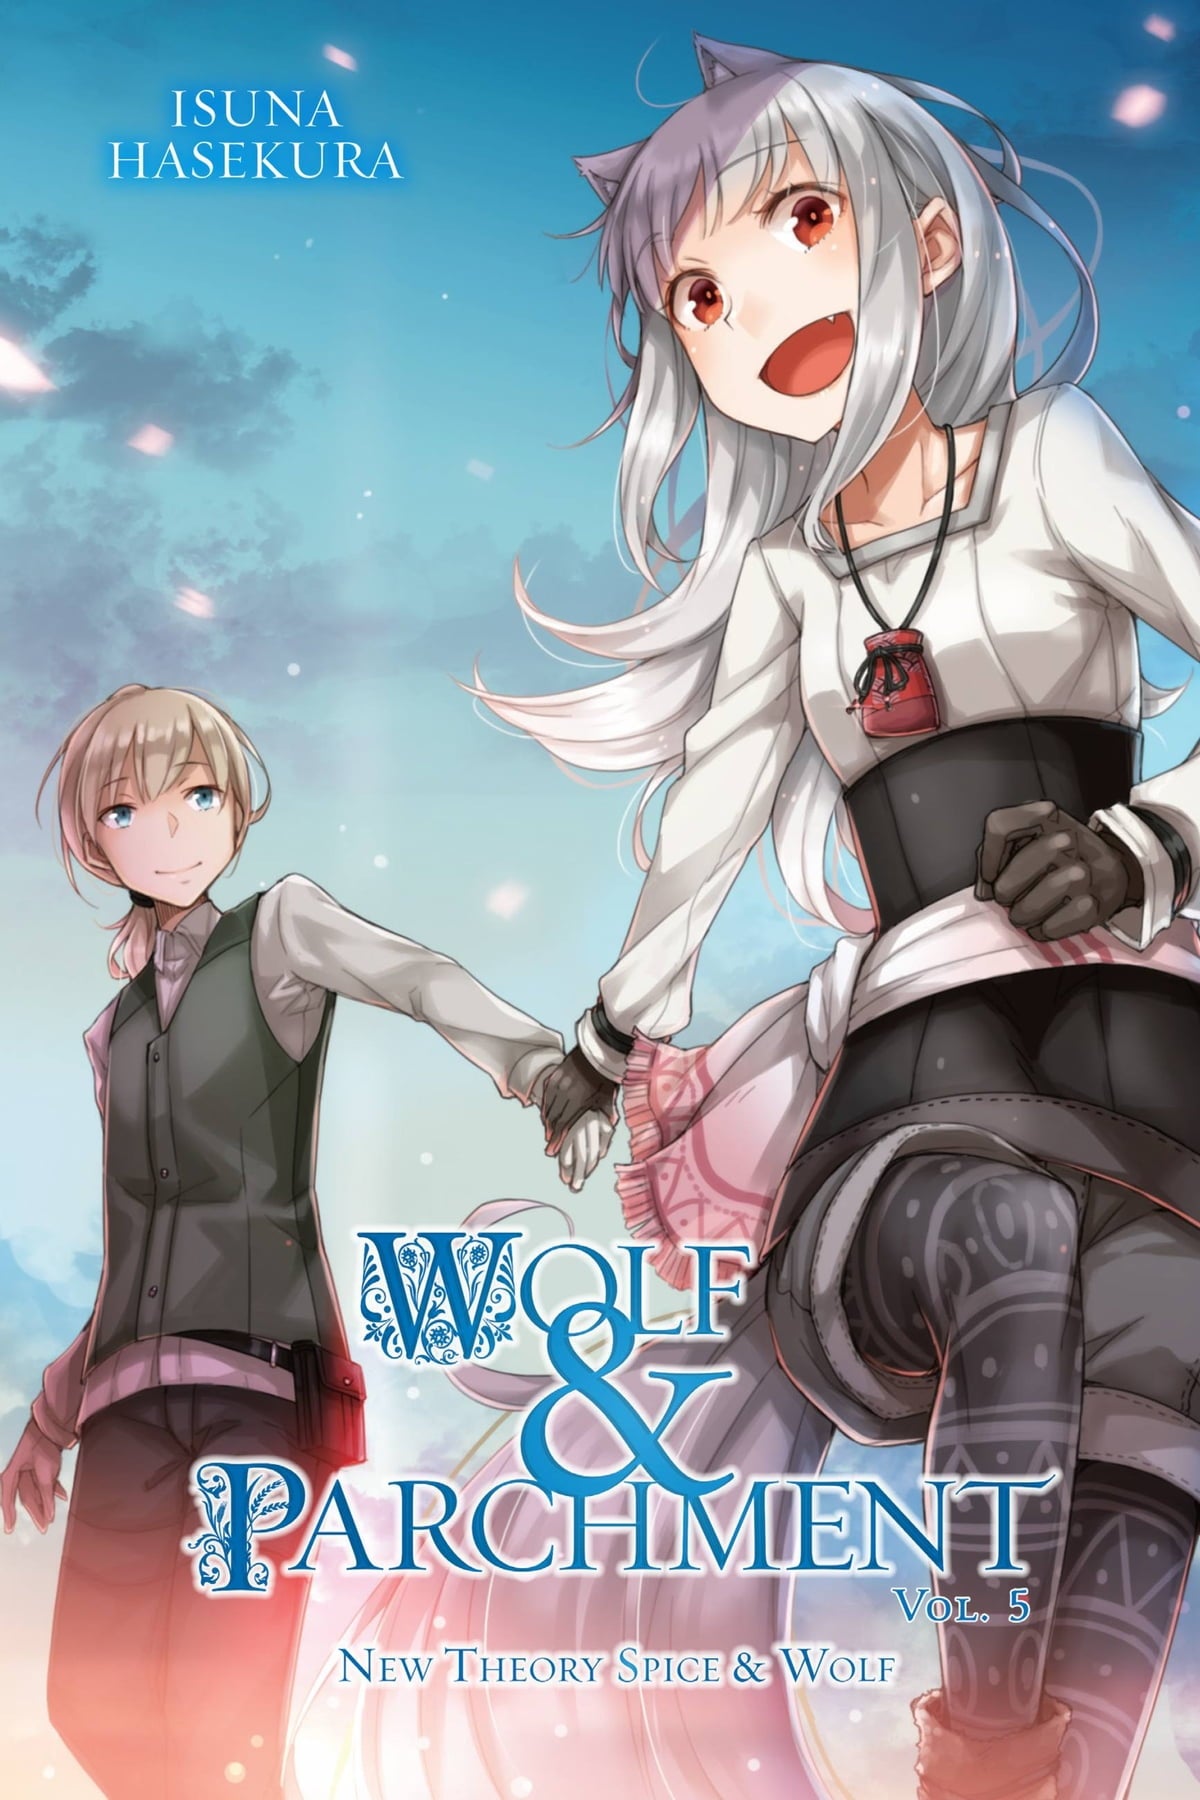 Wolf & Parchment: New Theory Spice & Wolf Vol. 05 (Light Novel)